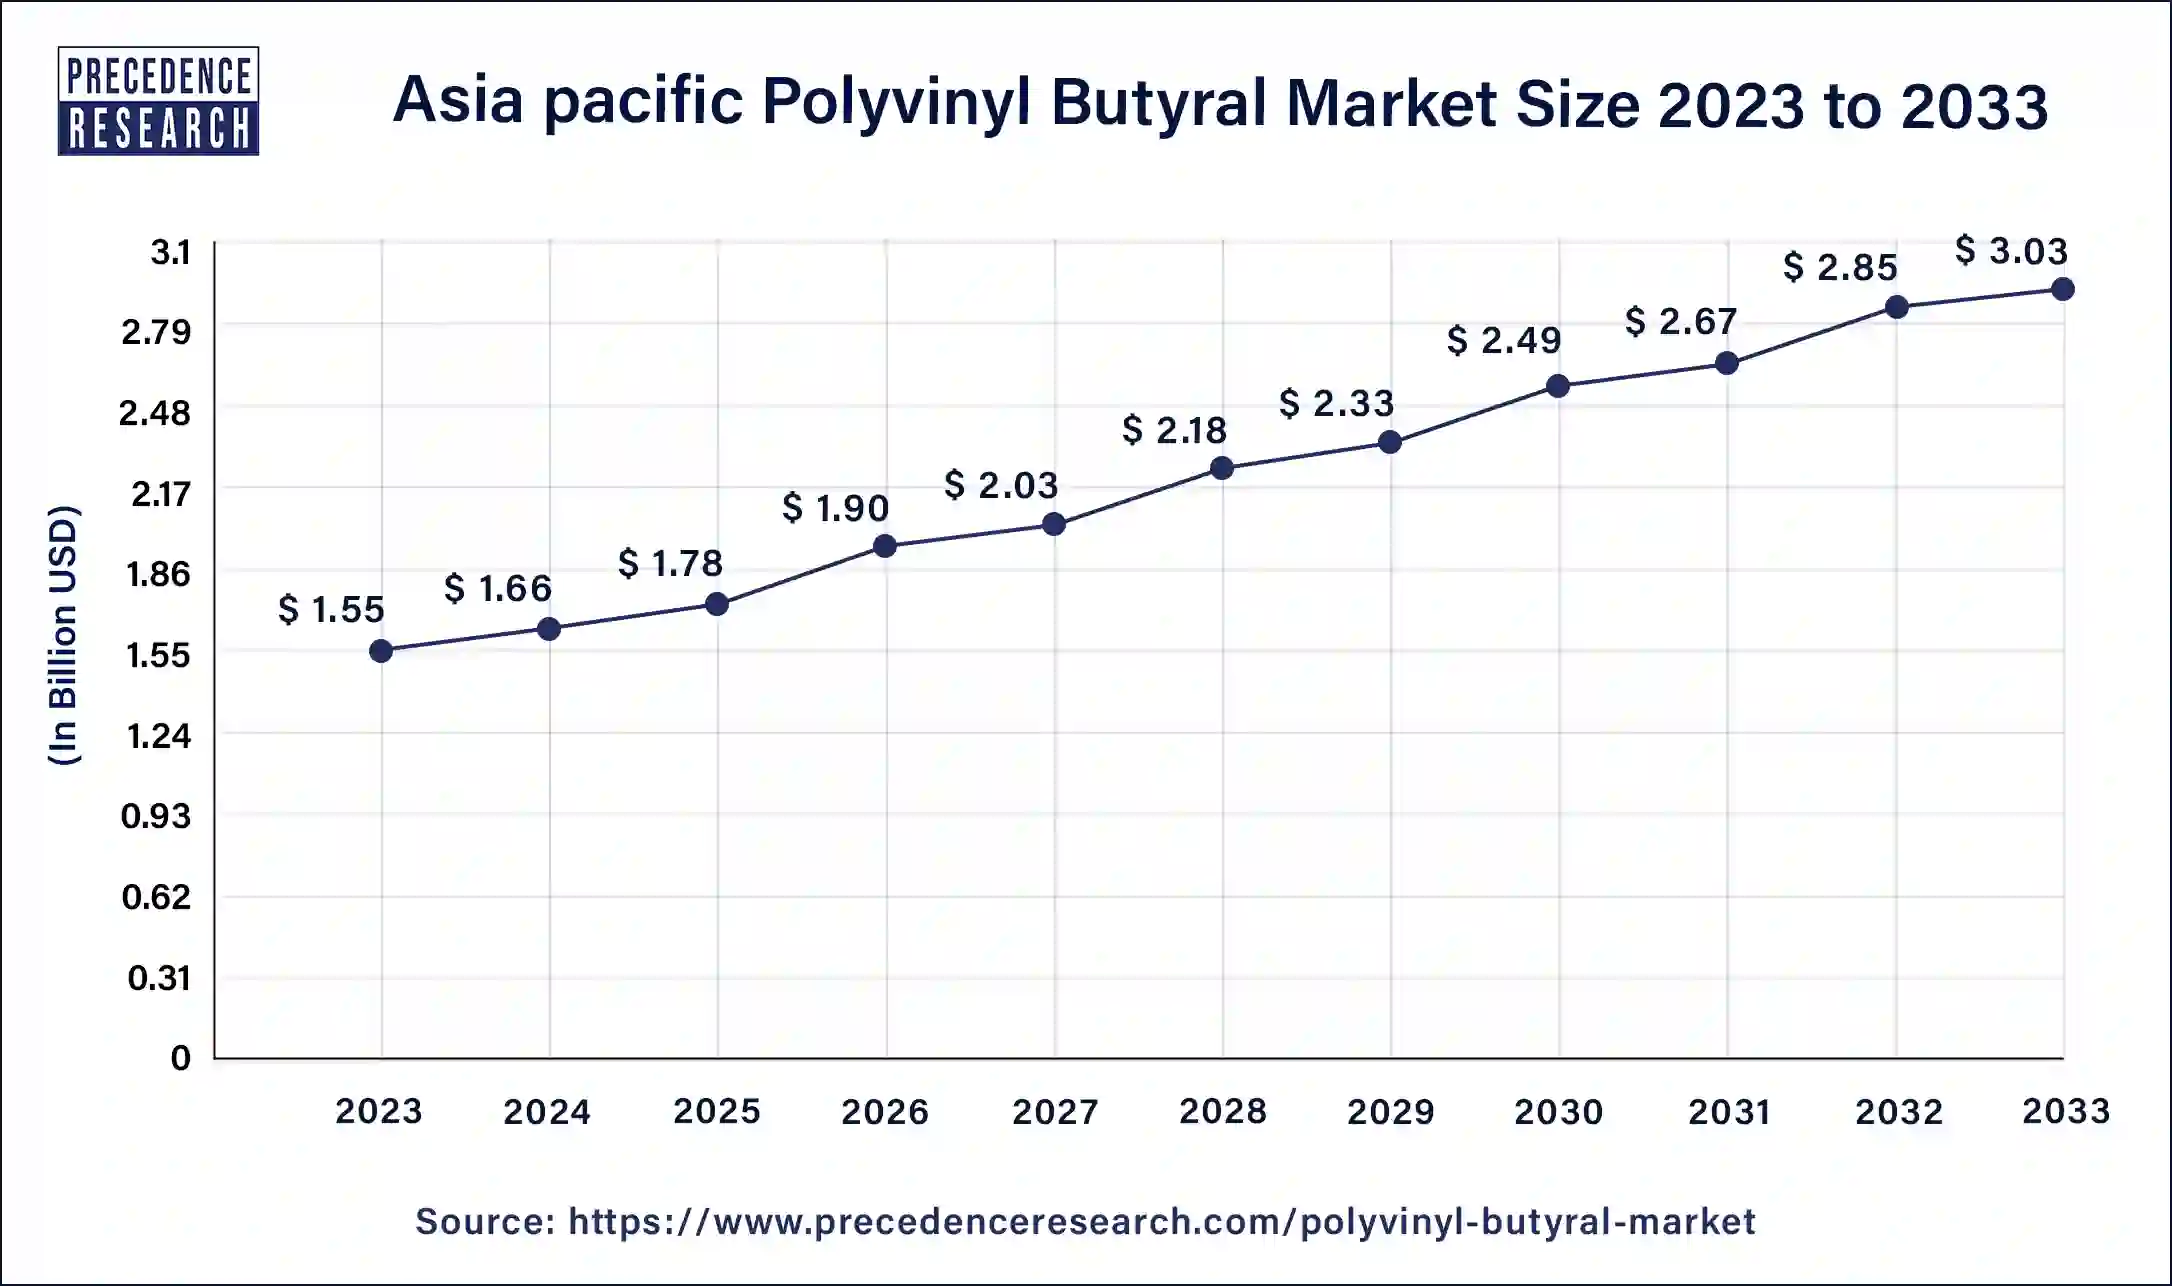 Asia Pacific Polyvinyl Butyral Market Size 2024 to 2033